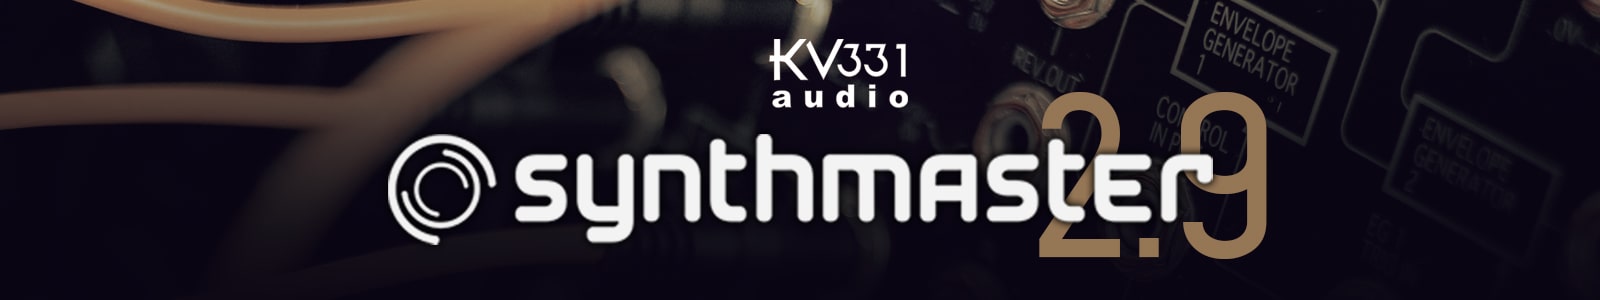 Synthmaster 2.9 by KV331 Audio